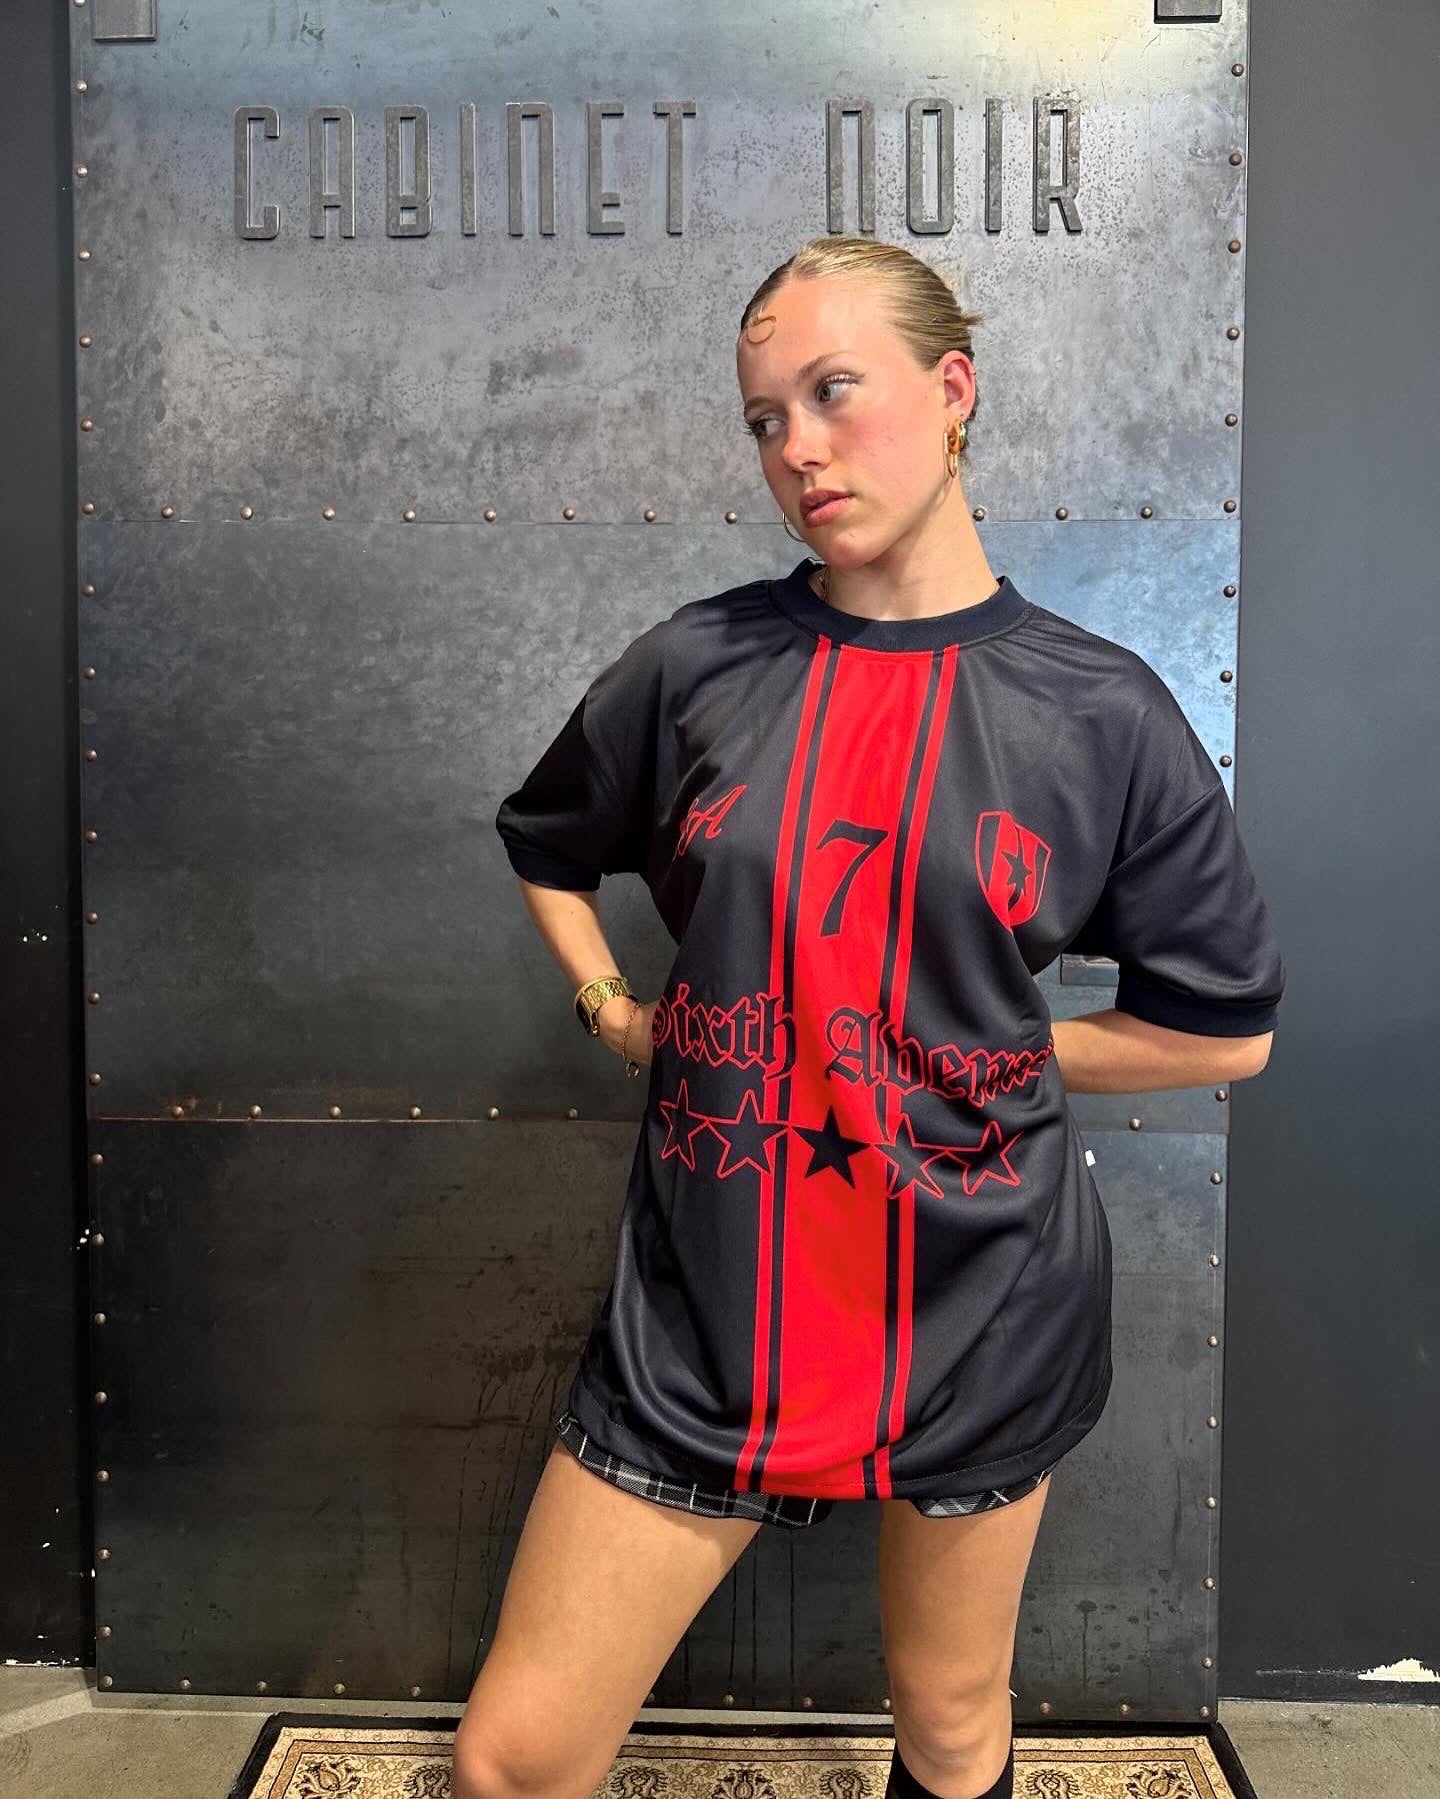 THE WORLD IS YOURS - REVERSIBLE SOCCER JERSEY